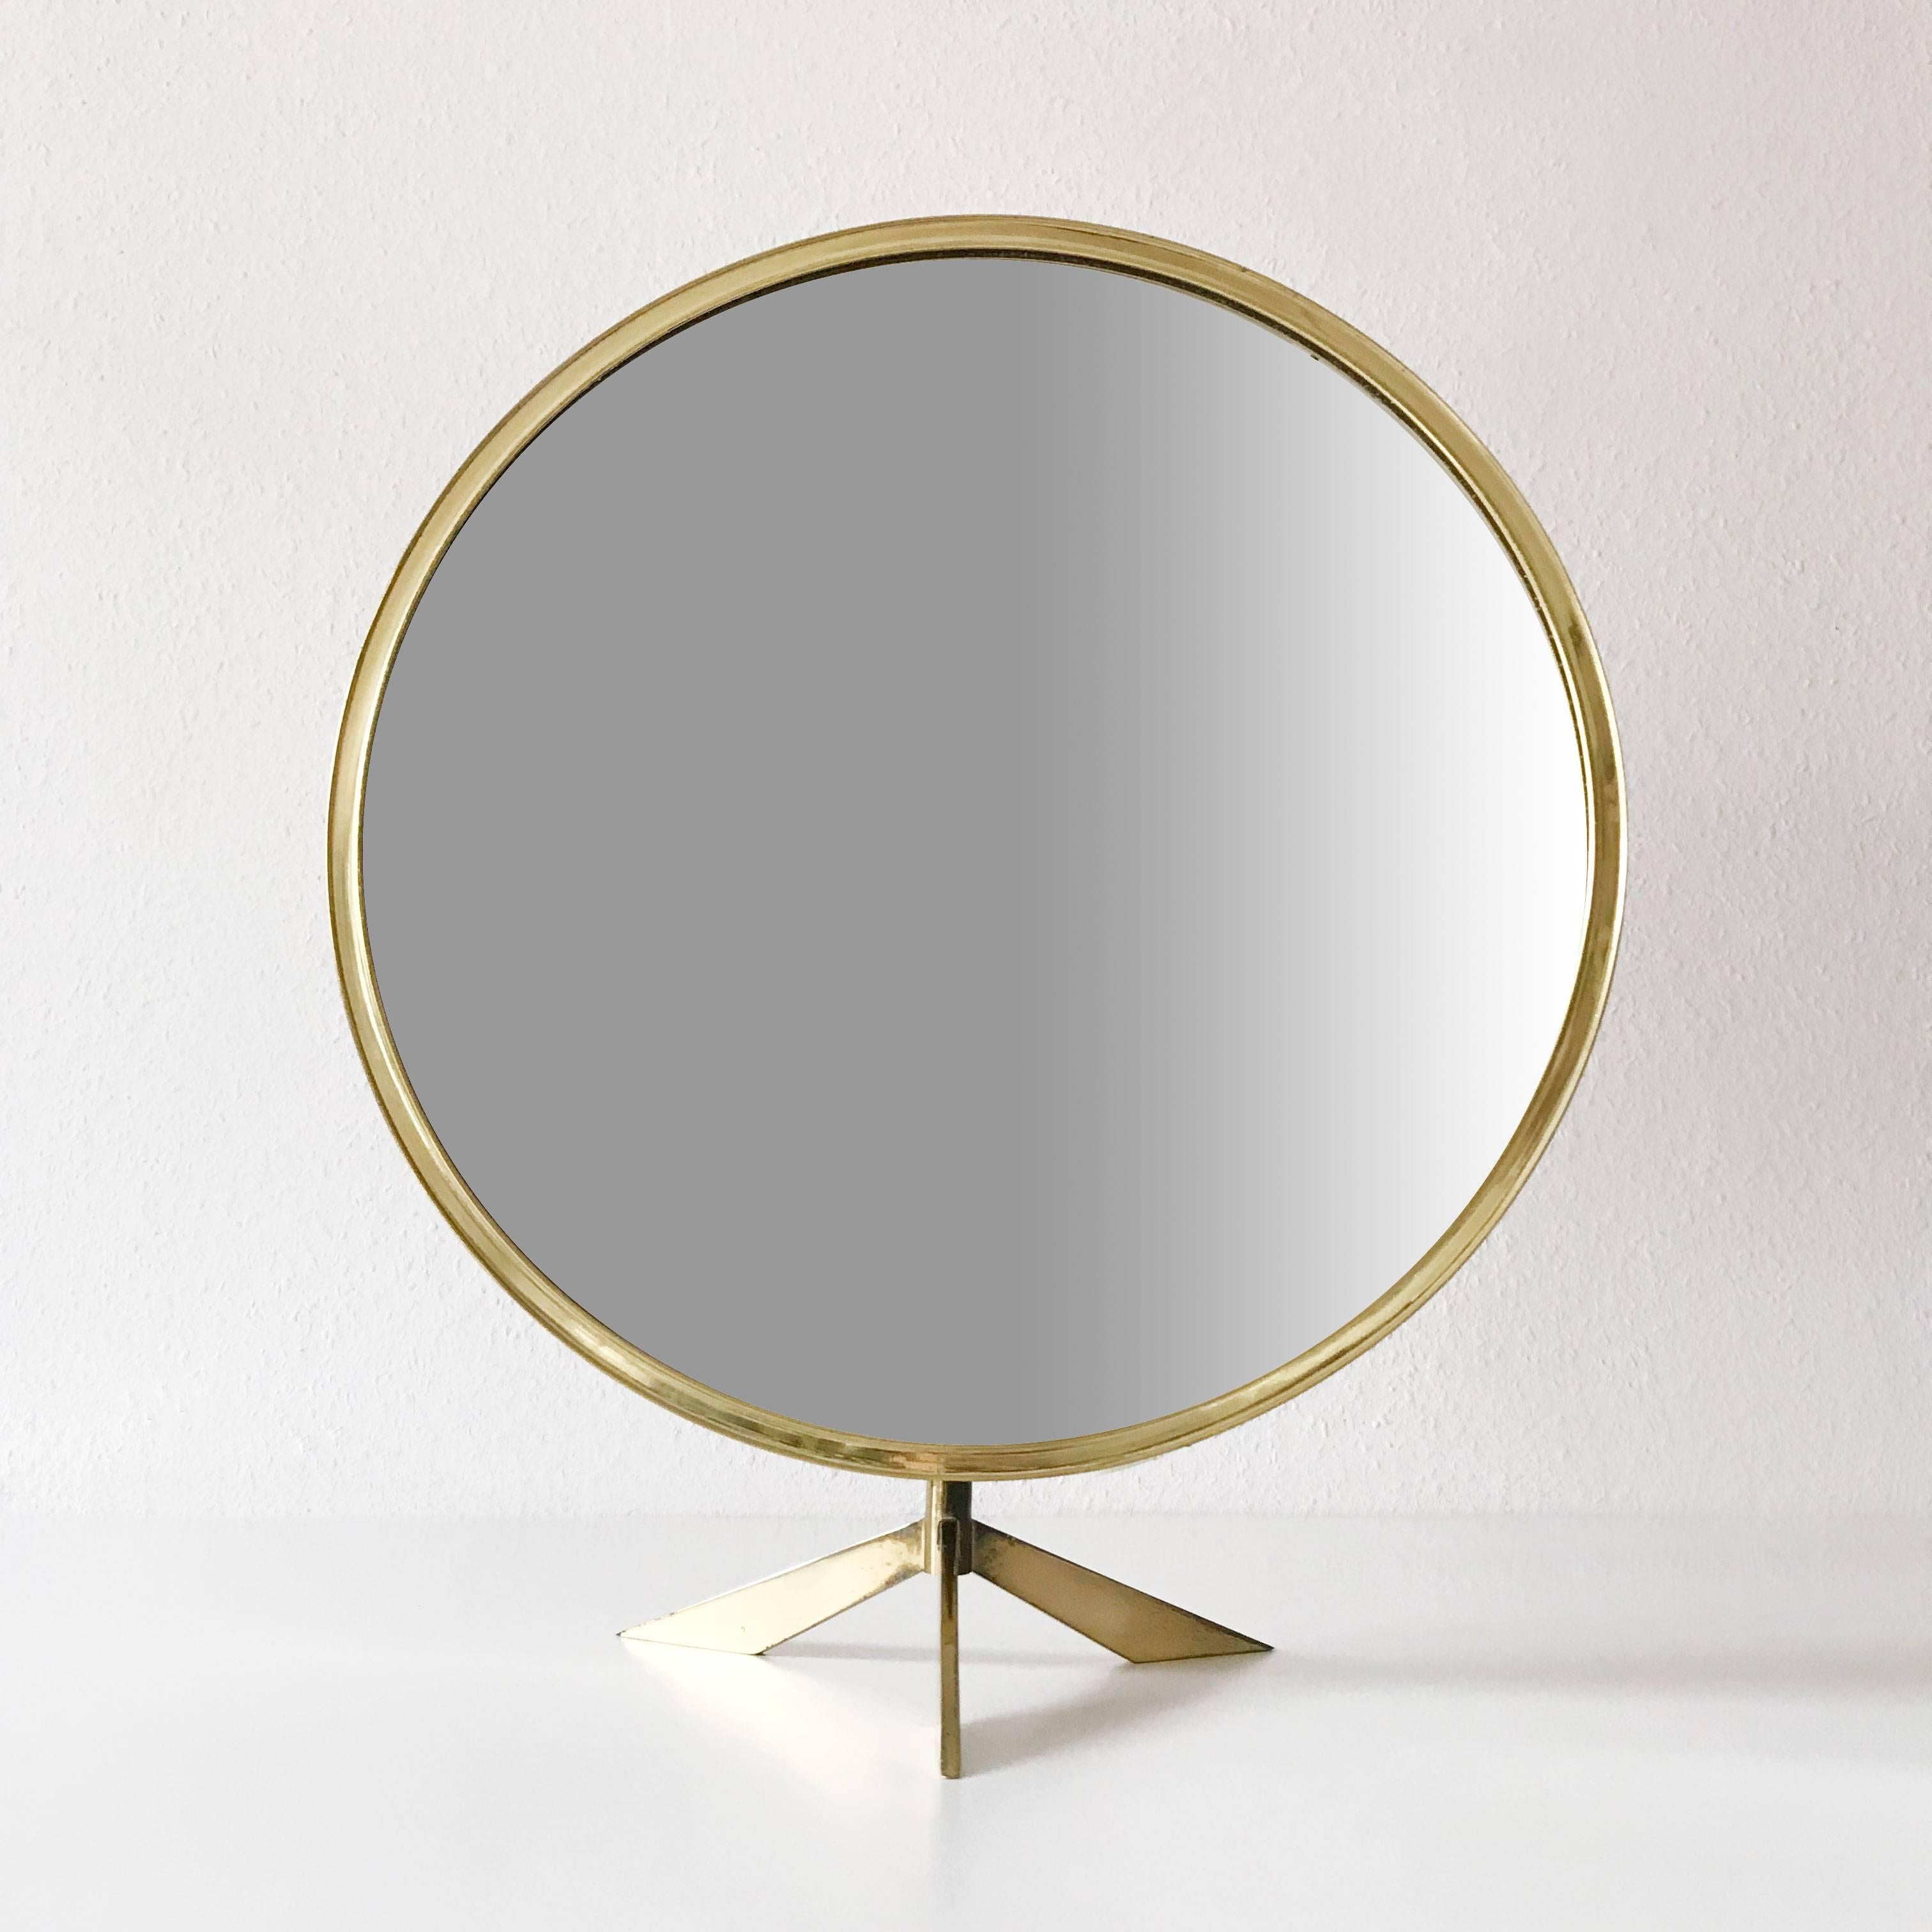 Exceptional Mid-Century Modern table mirror with brass frame. Manufactured by Vereinigte Werkstätten, Germany in 1960s.

This large make-up mirror is executed in solid brass and can be adjusted easily in wished position. 

Condition:
Good  original